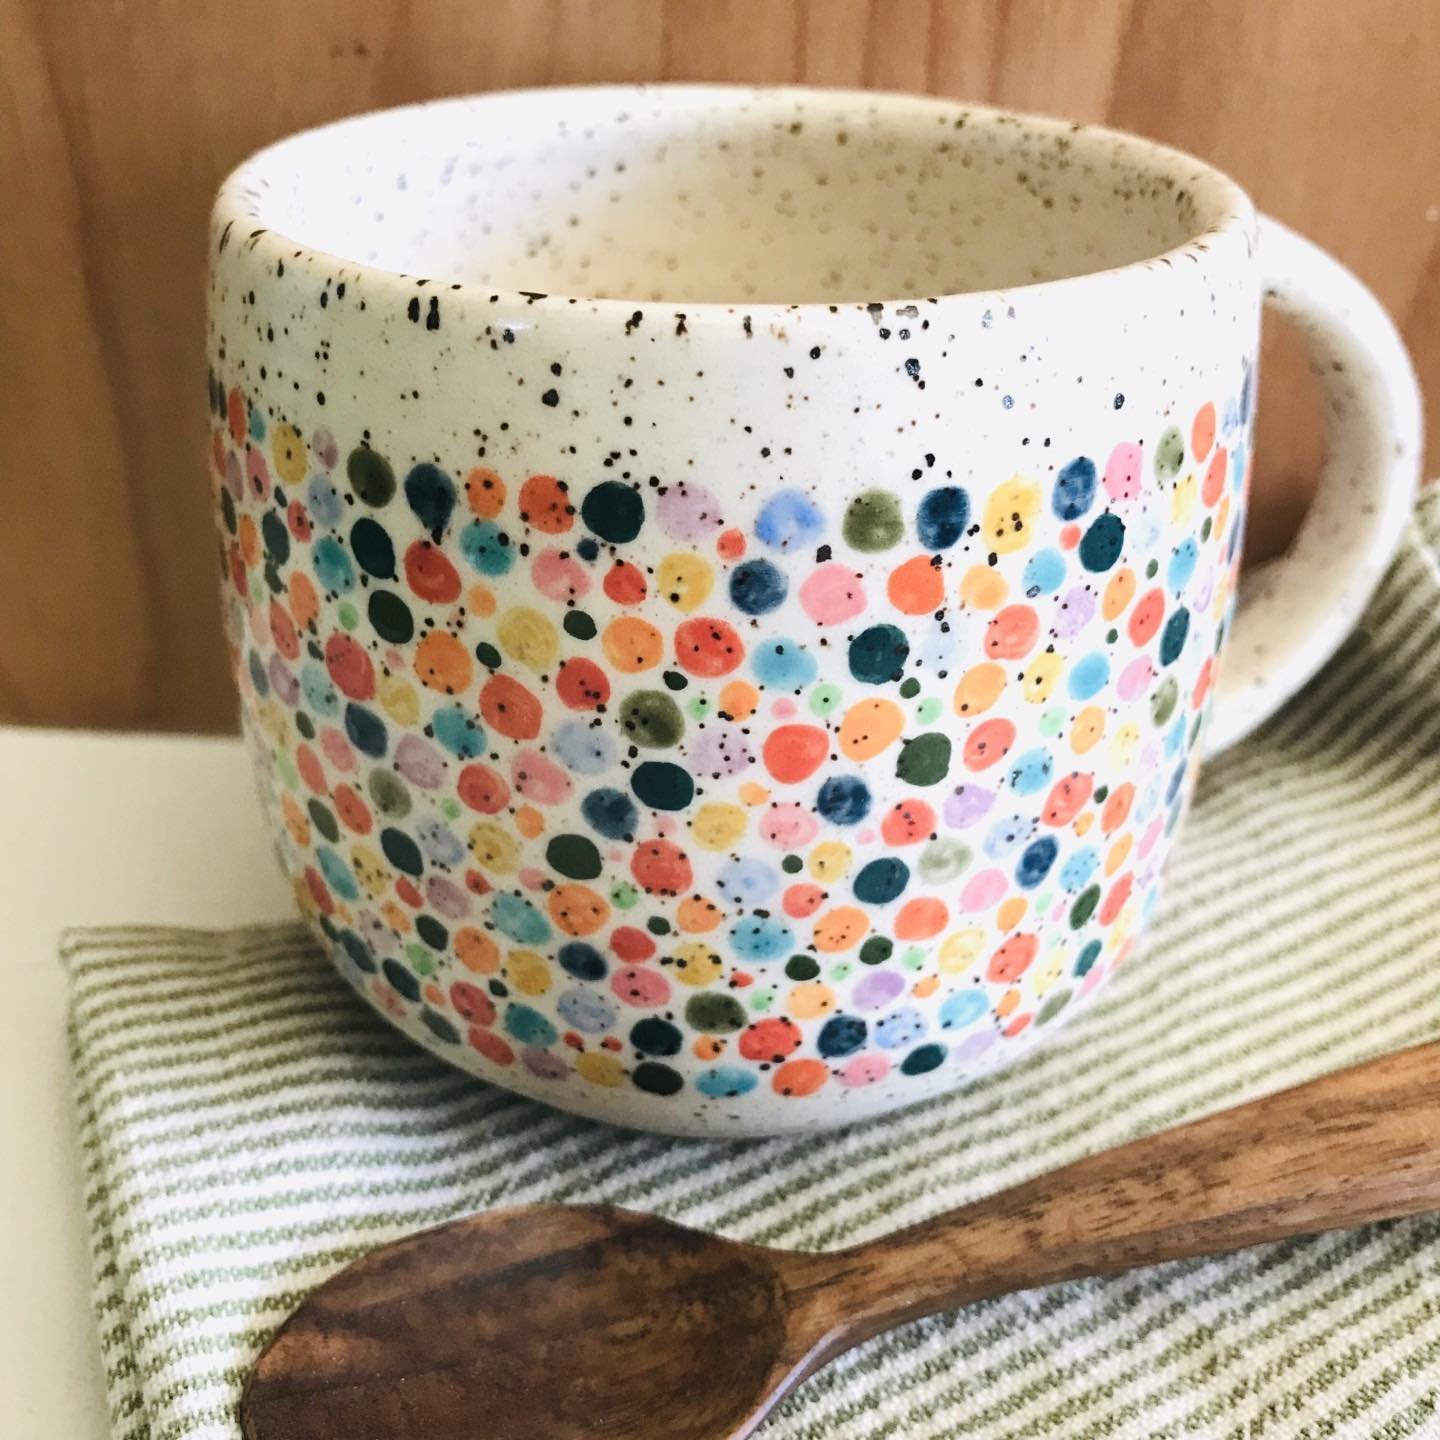 Dot mug in speckled white clay, in my shop and similar with me at the Easthampton Clay Spring sale May 11th 💙

#pottery #ceramics #art #illustratedceramics #illustratedpottery #surfacedesign #handmade #craft #wheelthrown #easthamptonclay #illustrato